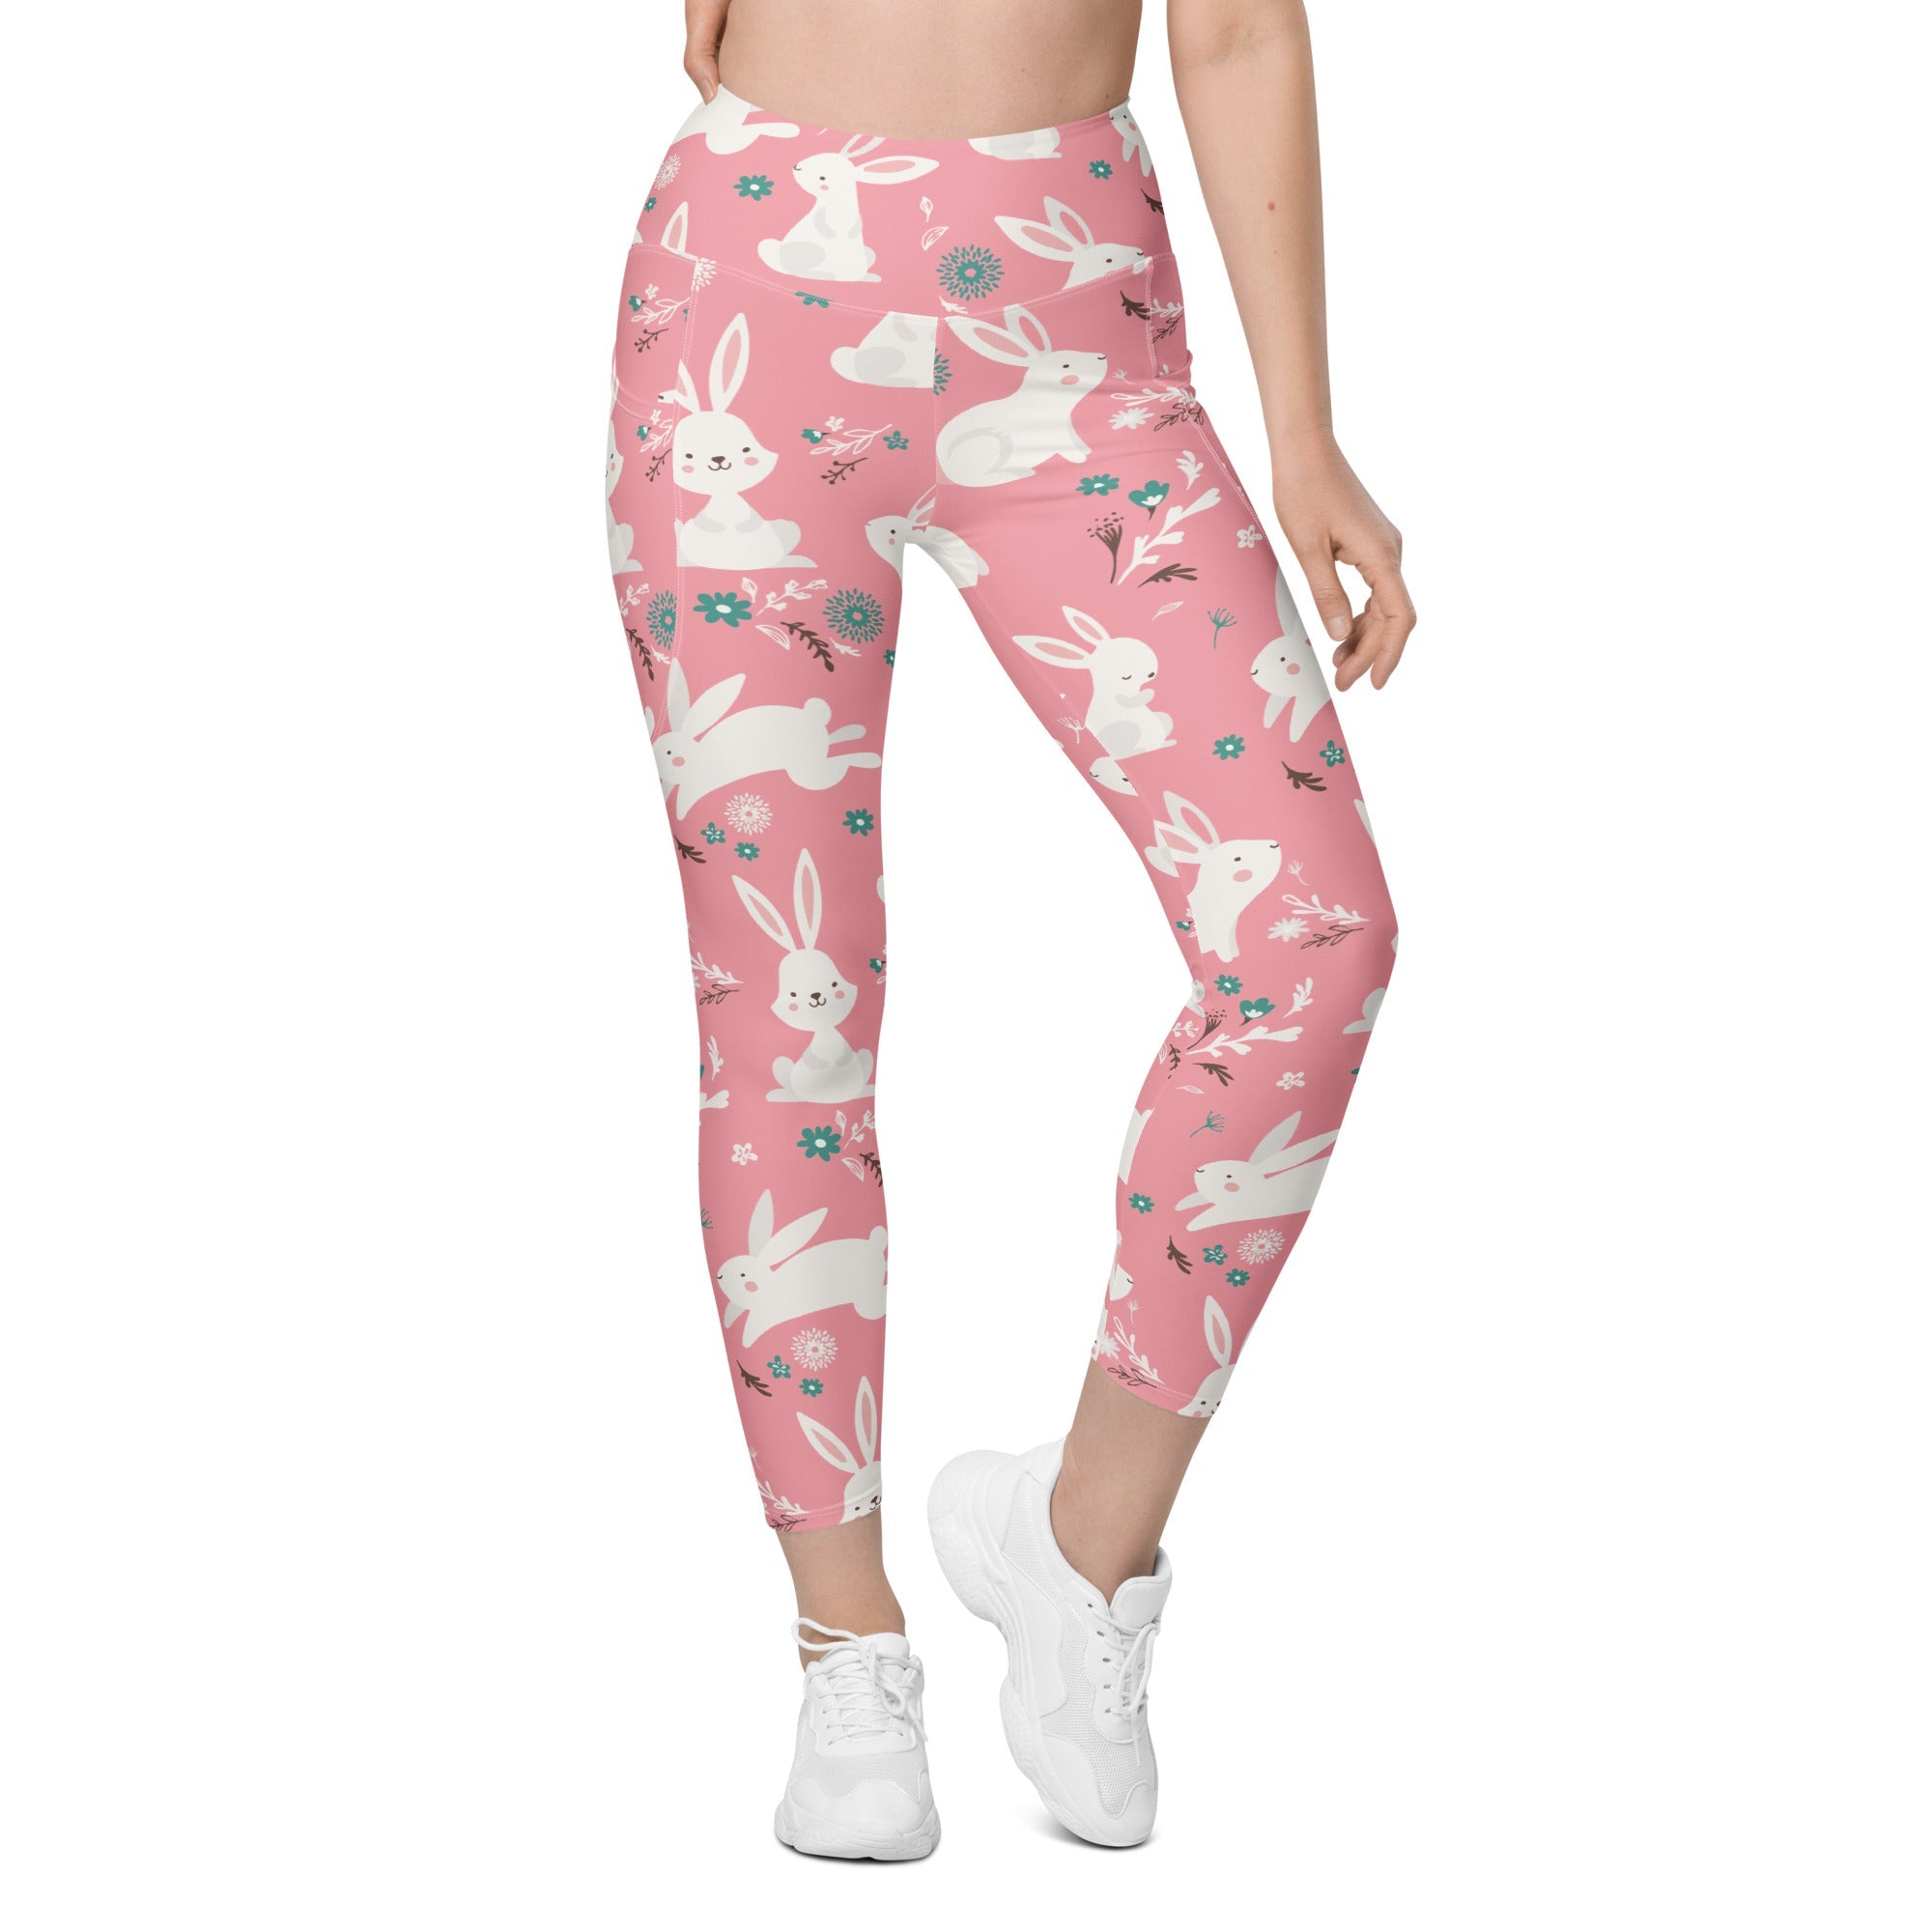 White Easter Bunnies Leggings With Pockets